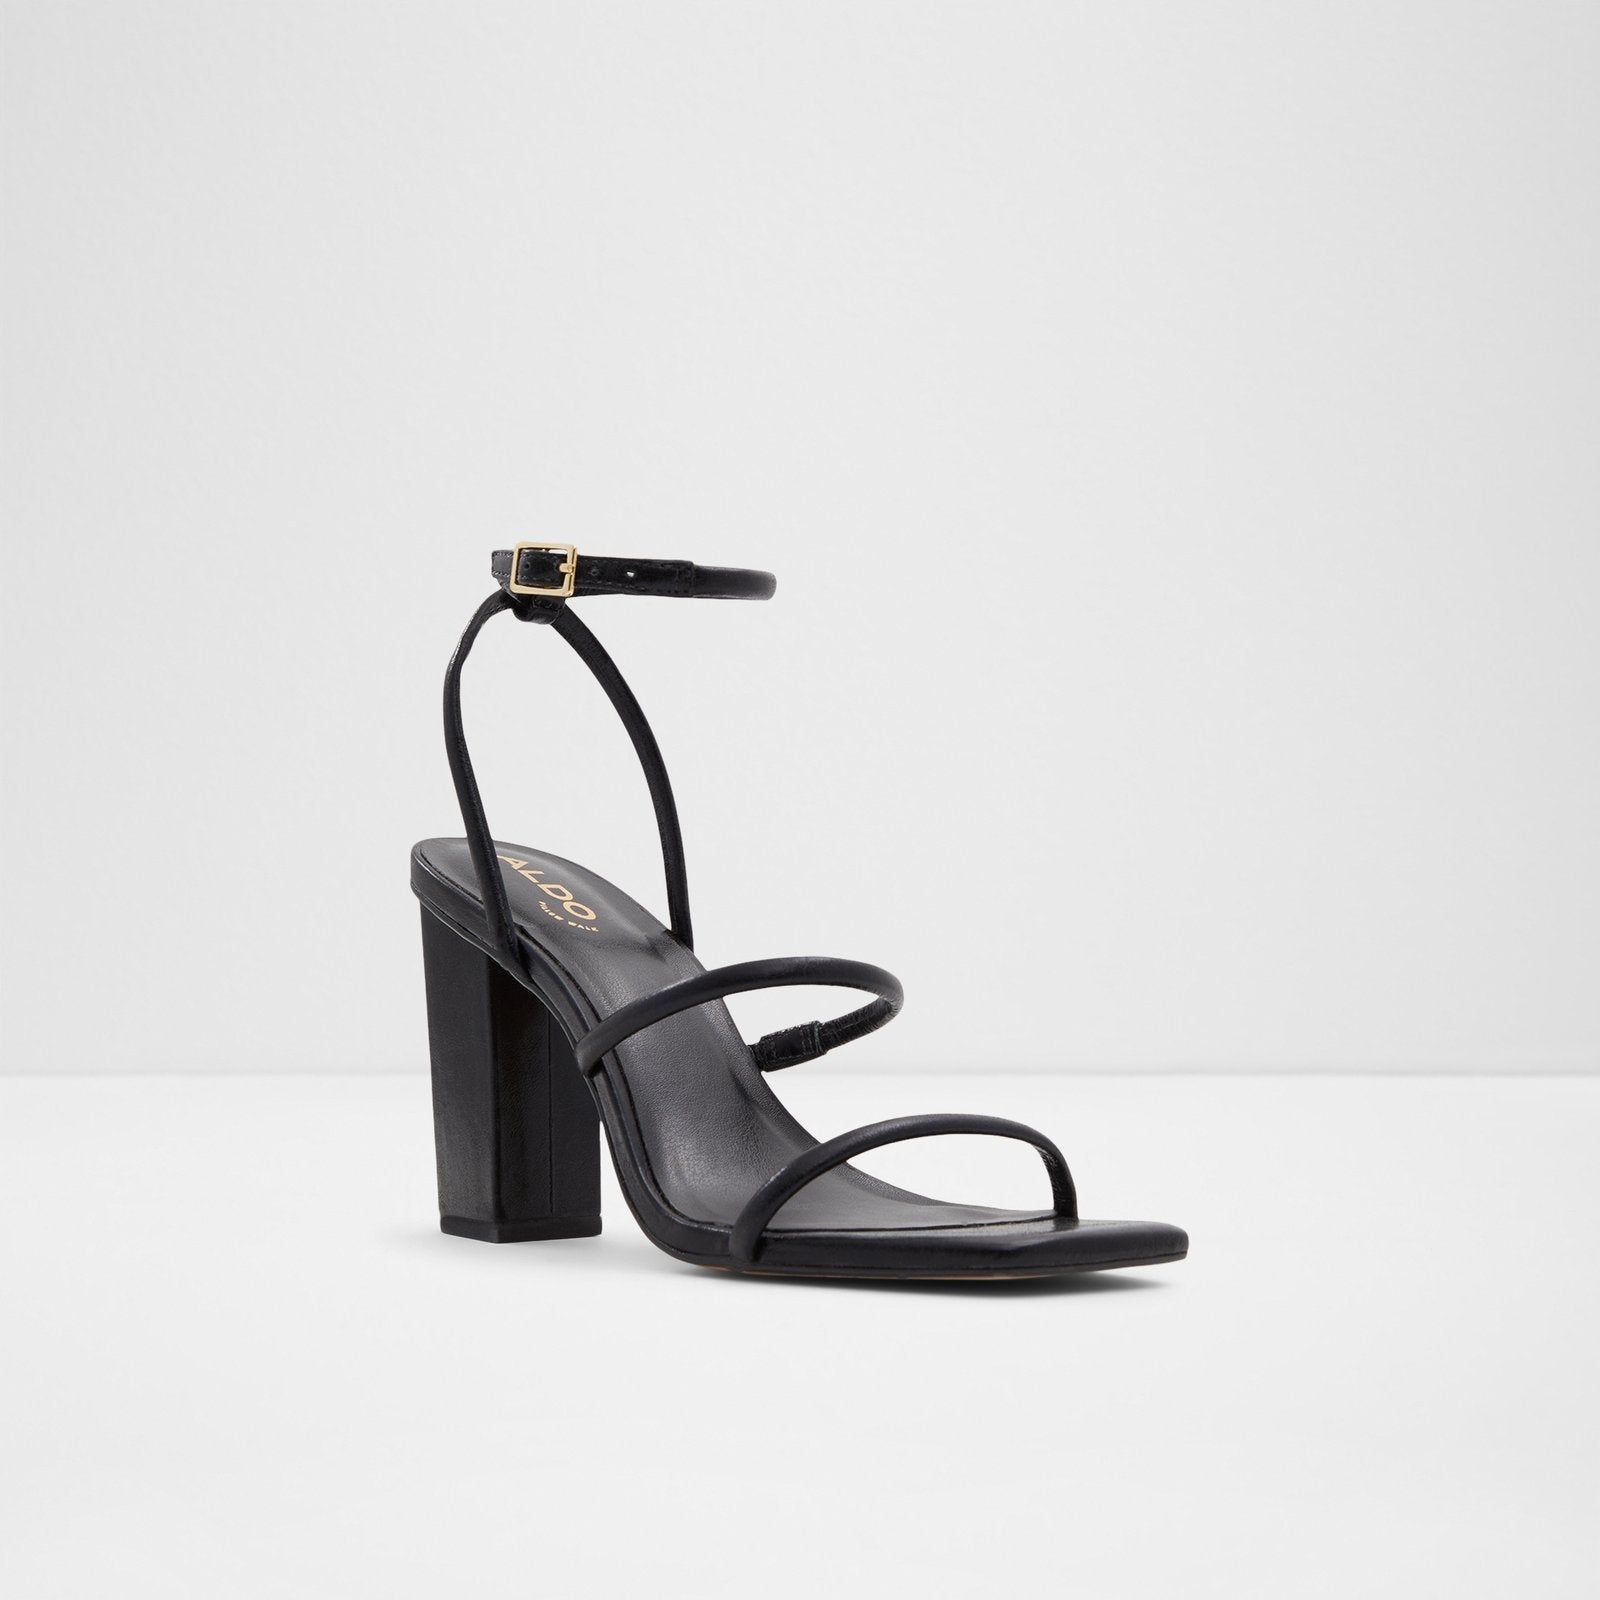 Inc.5 Mid Heel Fashion Sandal Grey Sandals: Buy Inc.5 Mid Heel Fashion  Sandal Grey Sandals Online at Best Price in India | Nykaa